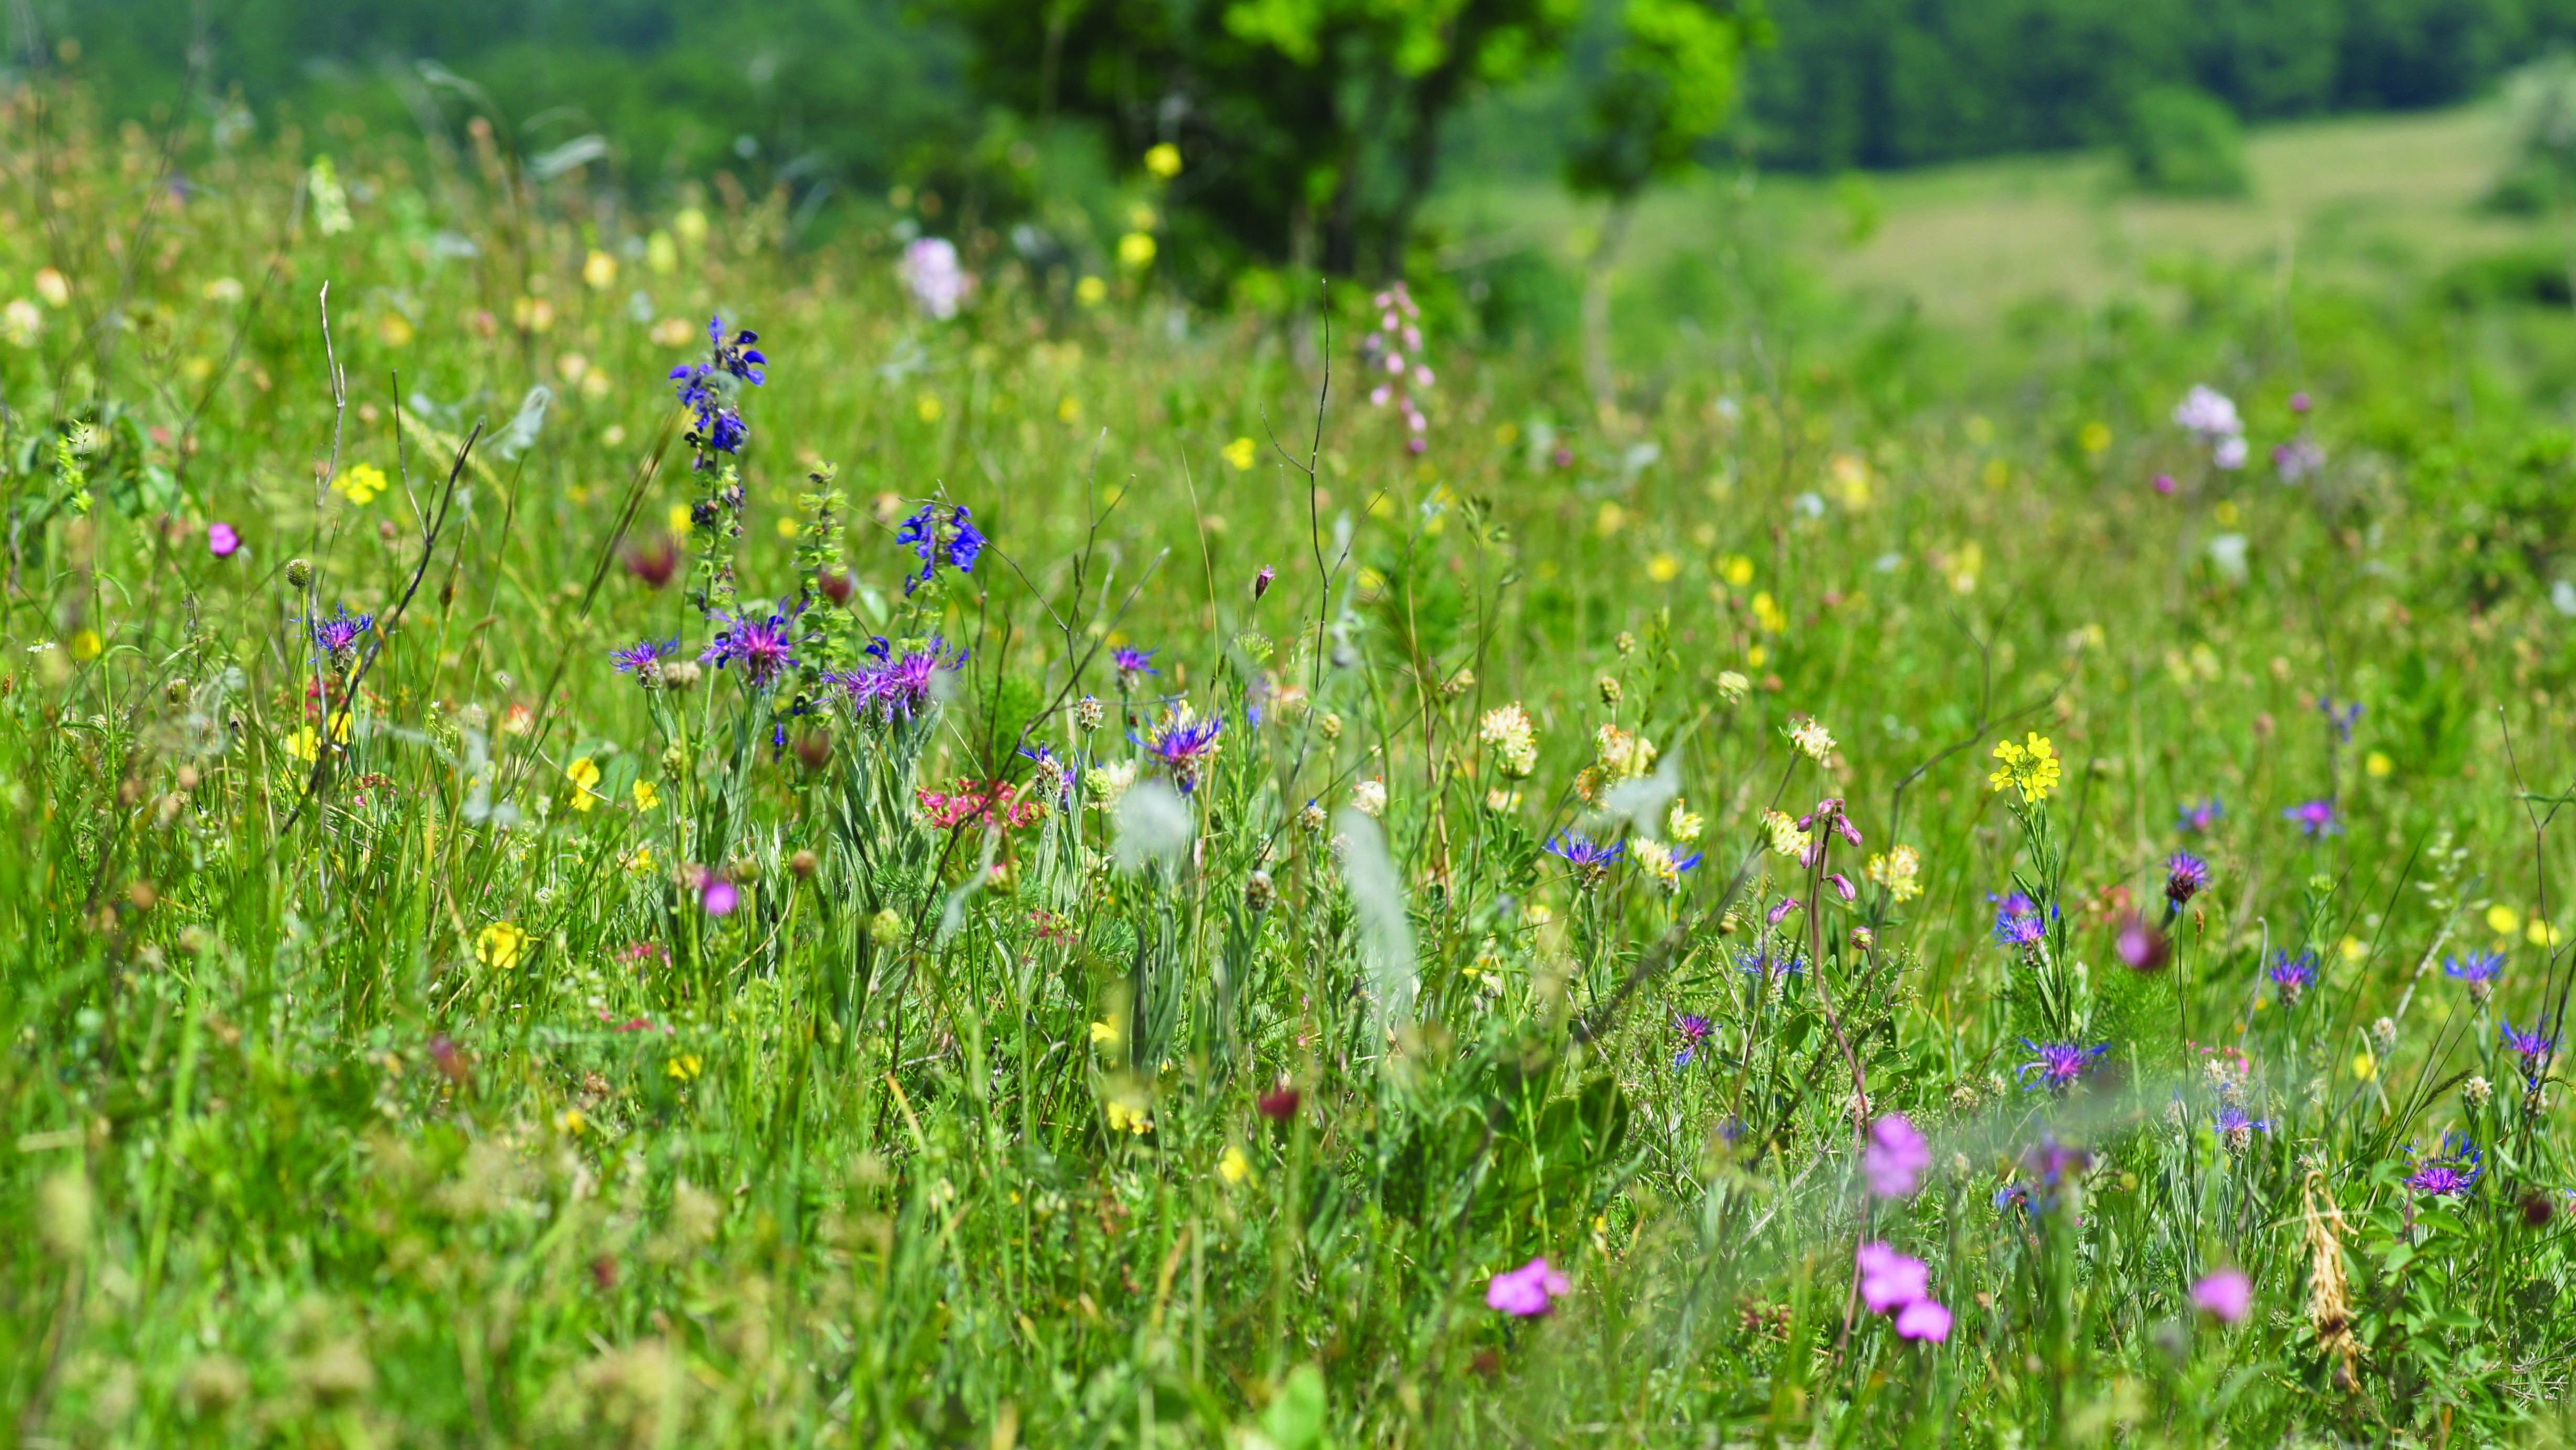 Flower-rich semi-natural grasslands are the home of many butterflies